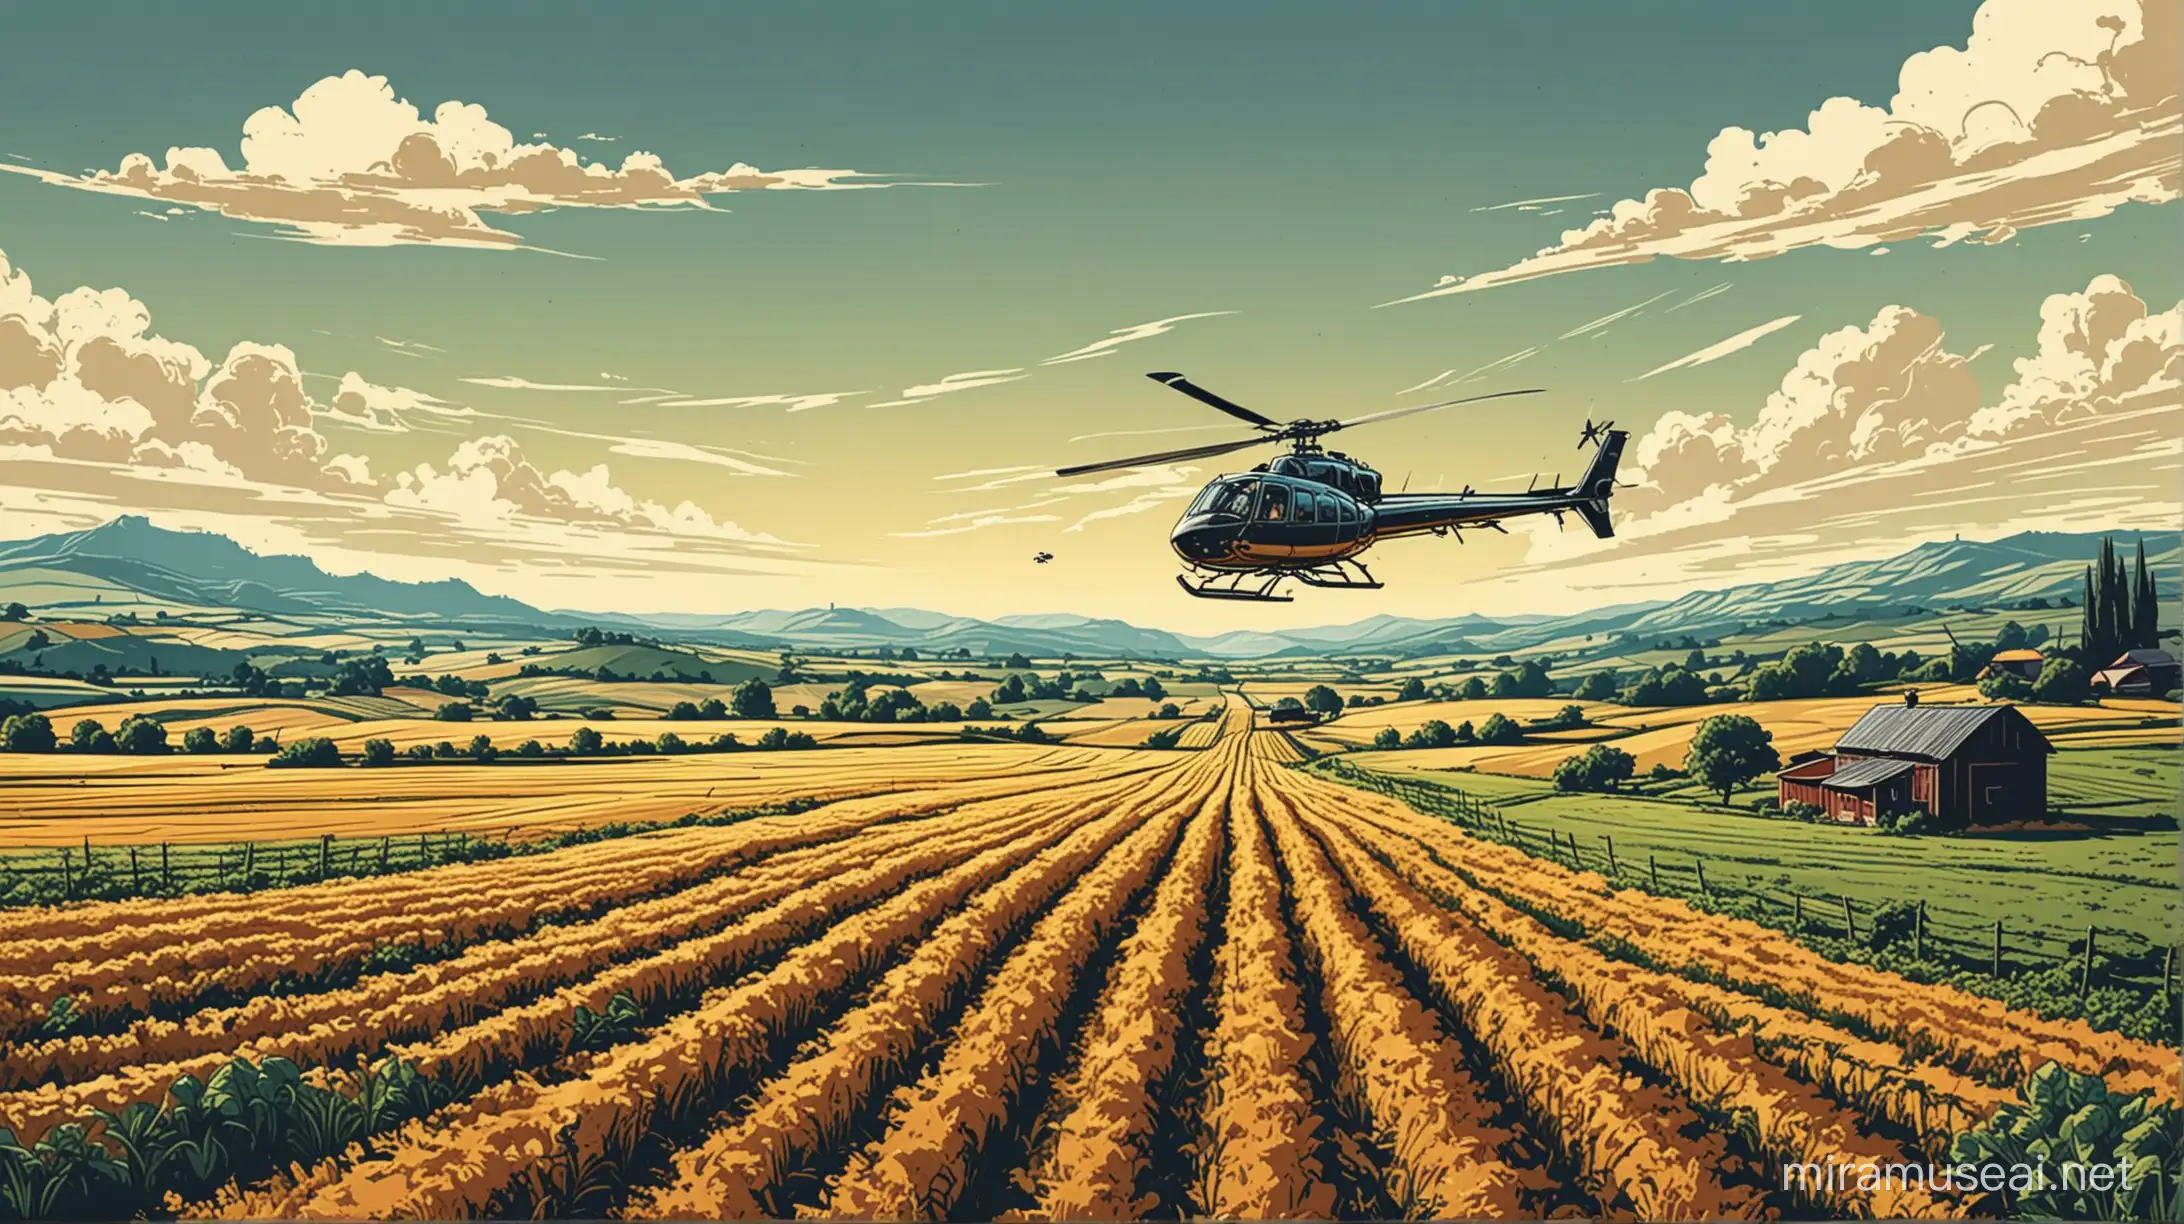 Vibrant Comic Book Illustration of Helicopter Over Farmland Fields